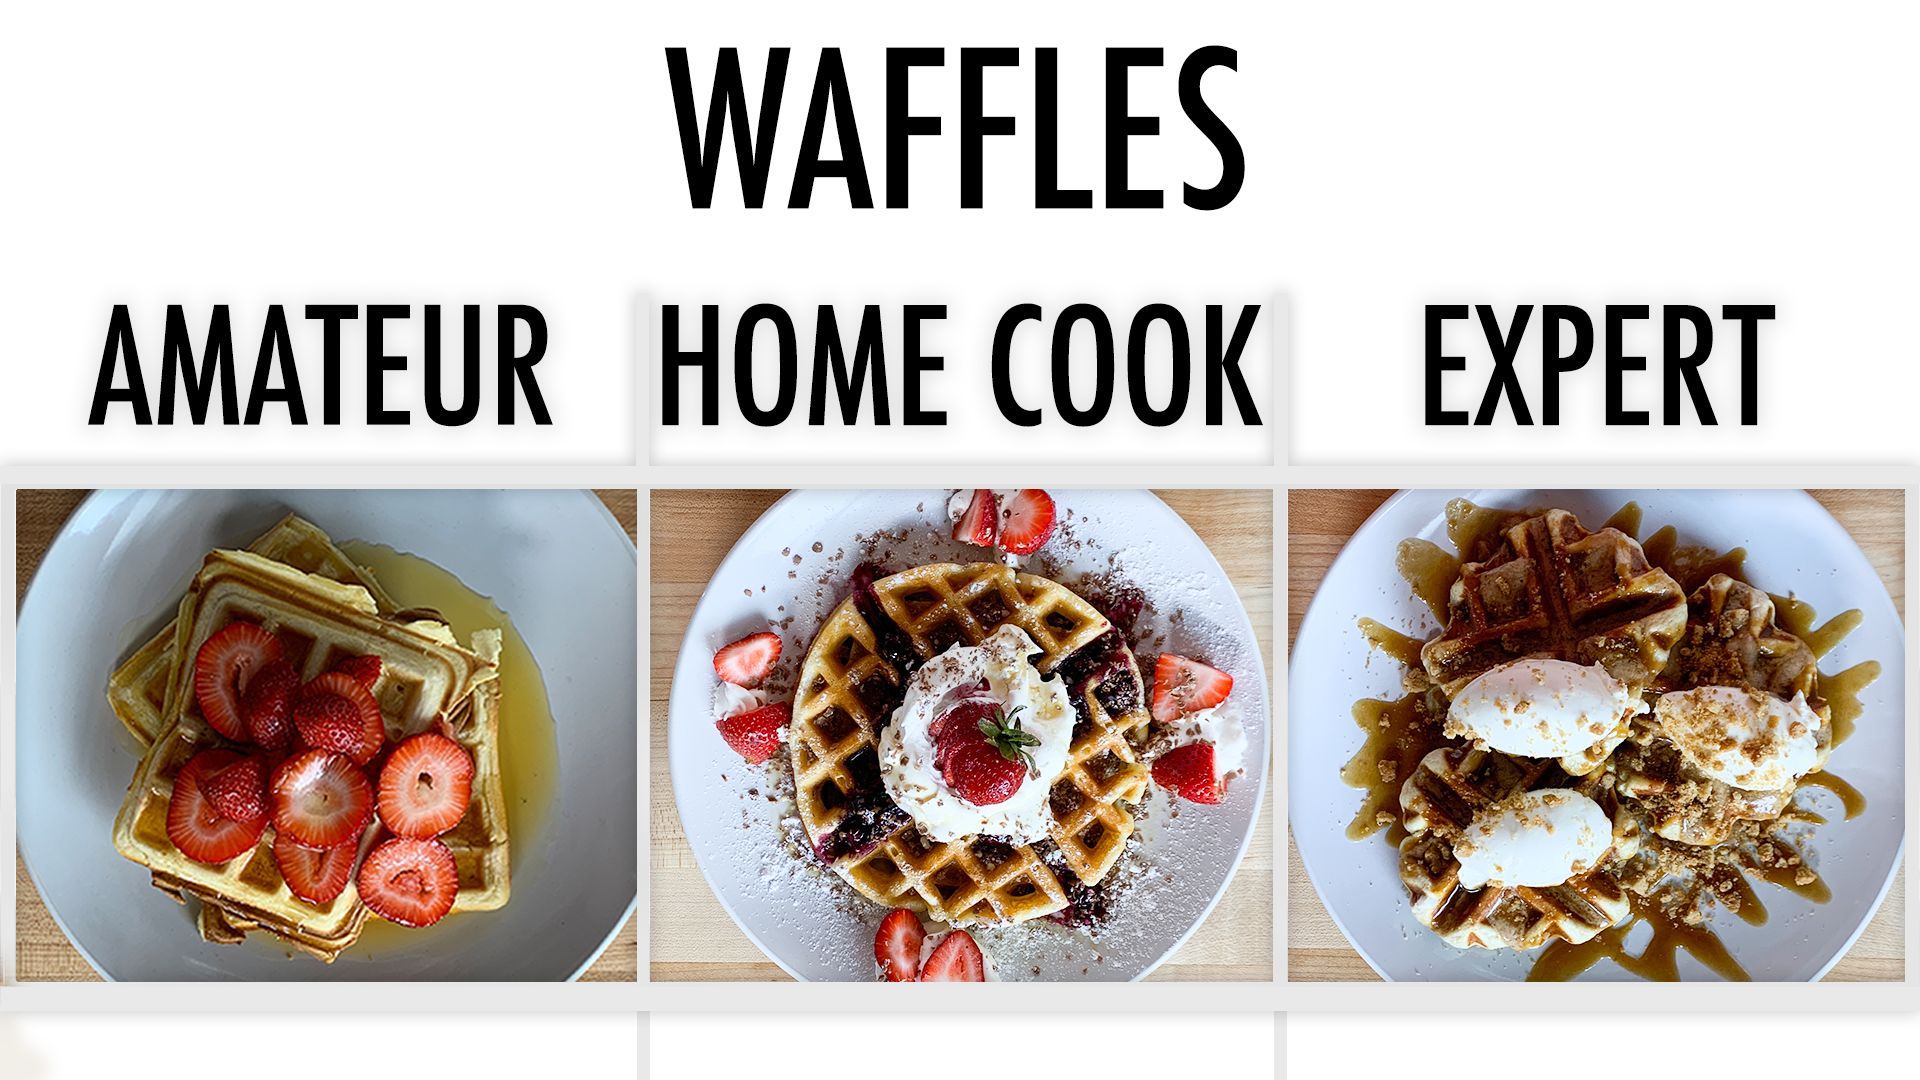 Watch 4 Levels Of Waffles Amateur To Food Scientist 4 Levels Epicurious